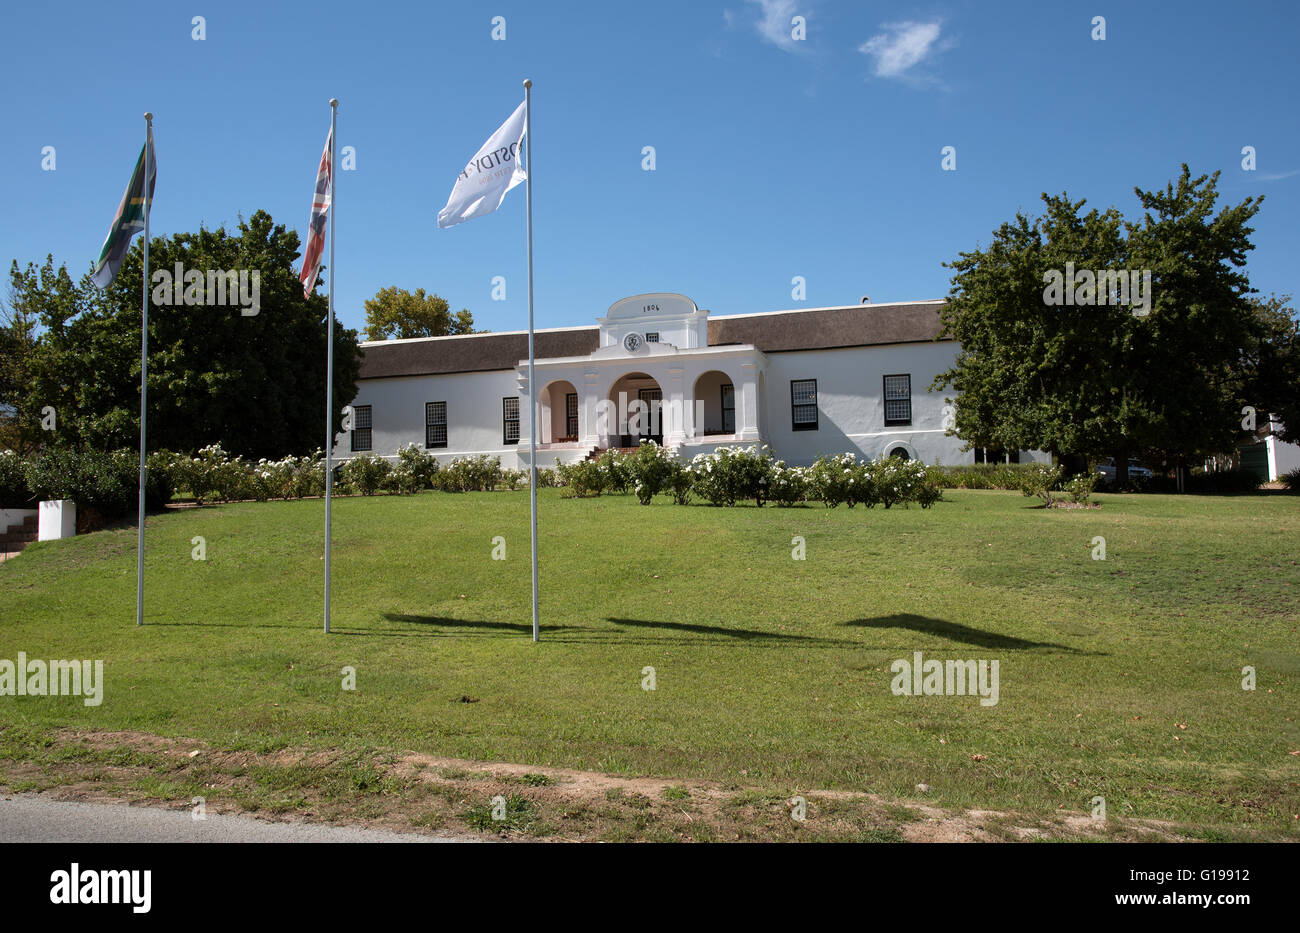 TULBACH WESTERN CAPE SOUTH AFRICA. The Drosty House in the historic little town of Tulbach Southern Africa Stock Photo